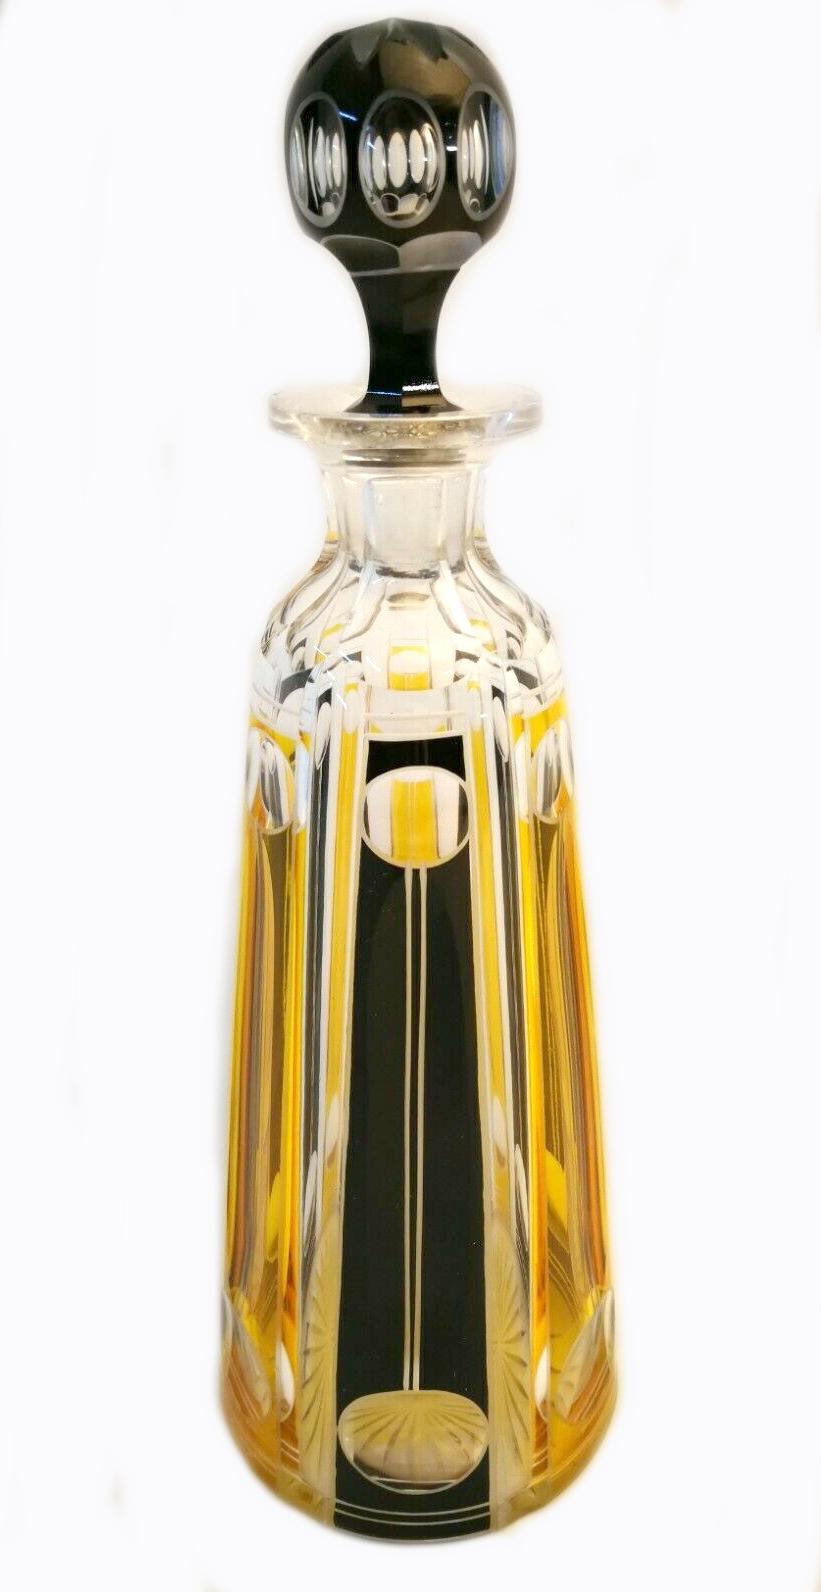 This is a wonderful opportunity to acquire a very stylish and collectable Art Deco cut glass decanter set by Karl Palda. The set comprises a tall decanter with a faceted stopper which has an over-lay in black and yellow enamel. The six accompanying